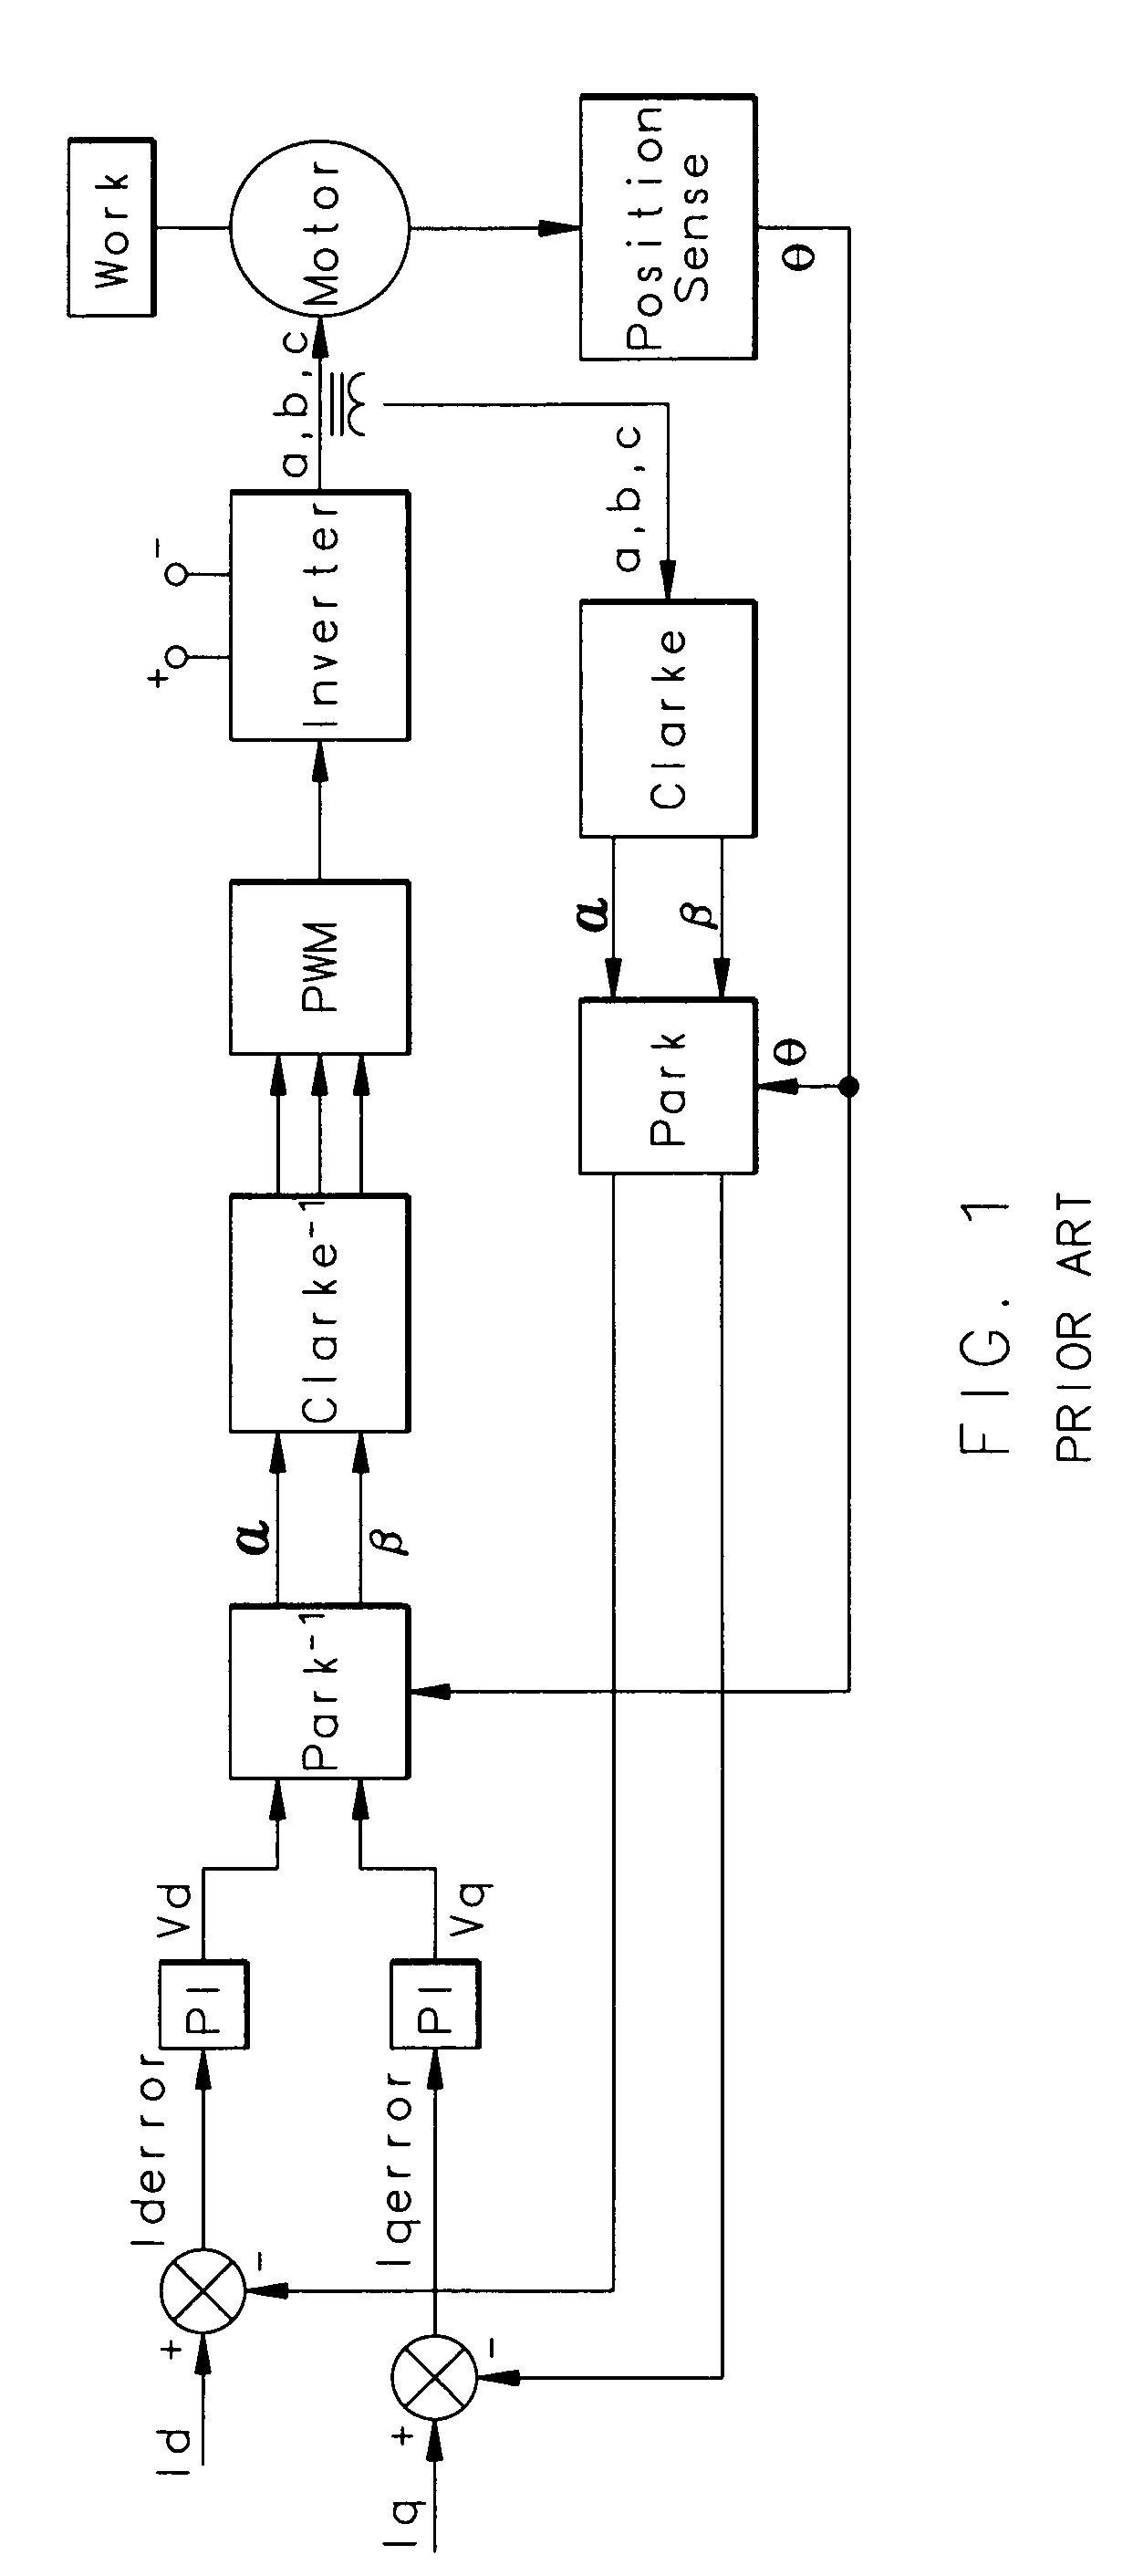 Performance enhancement for motor field oriented control system